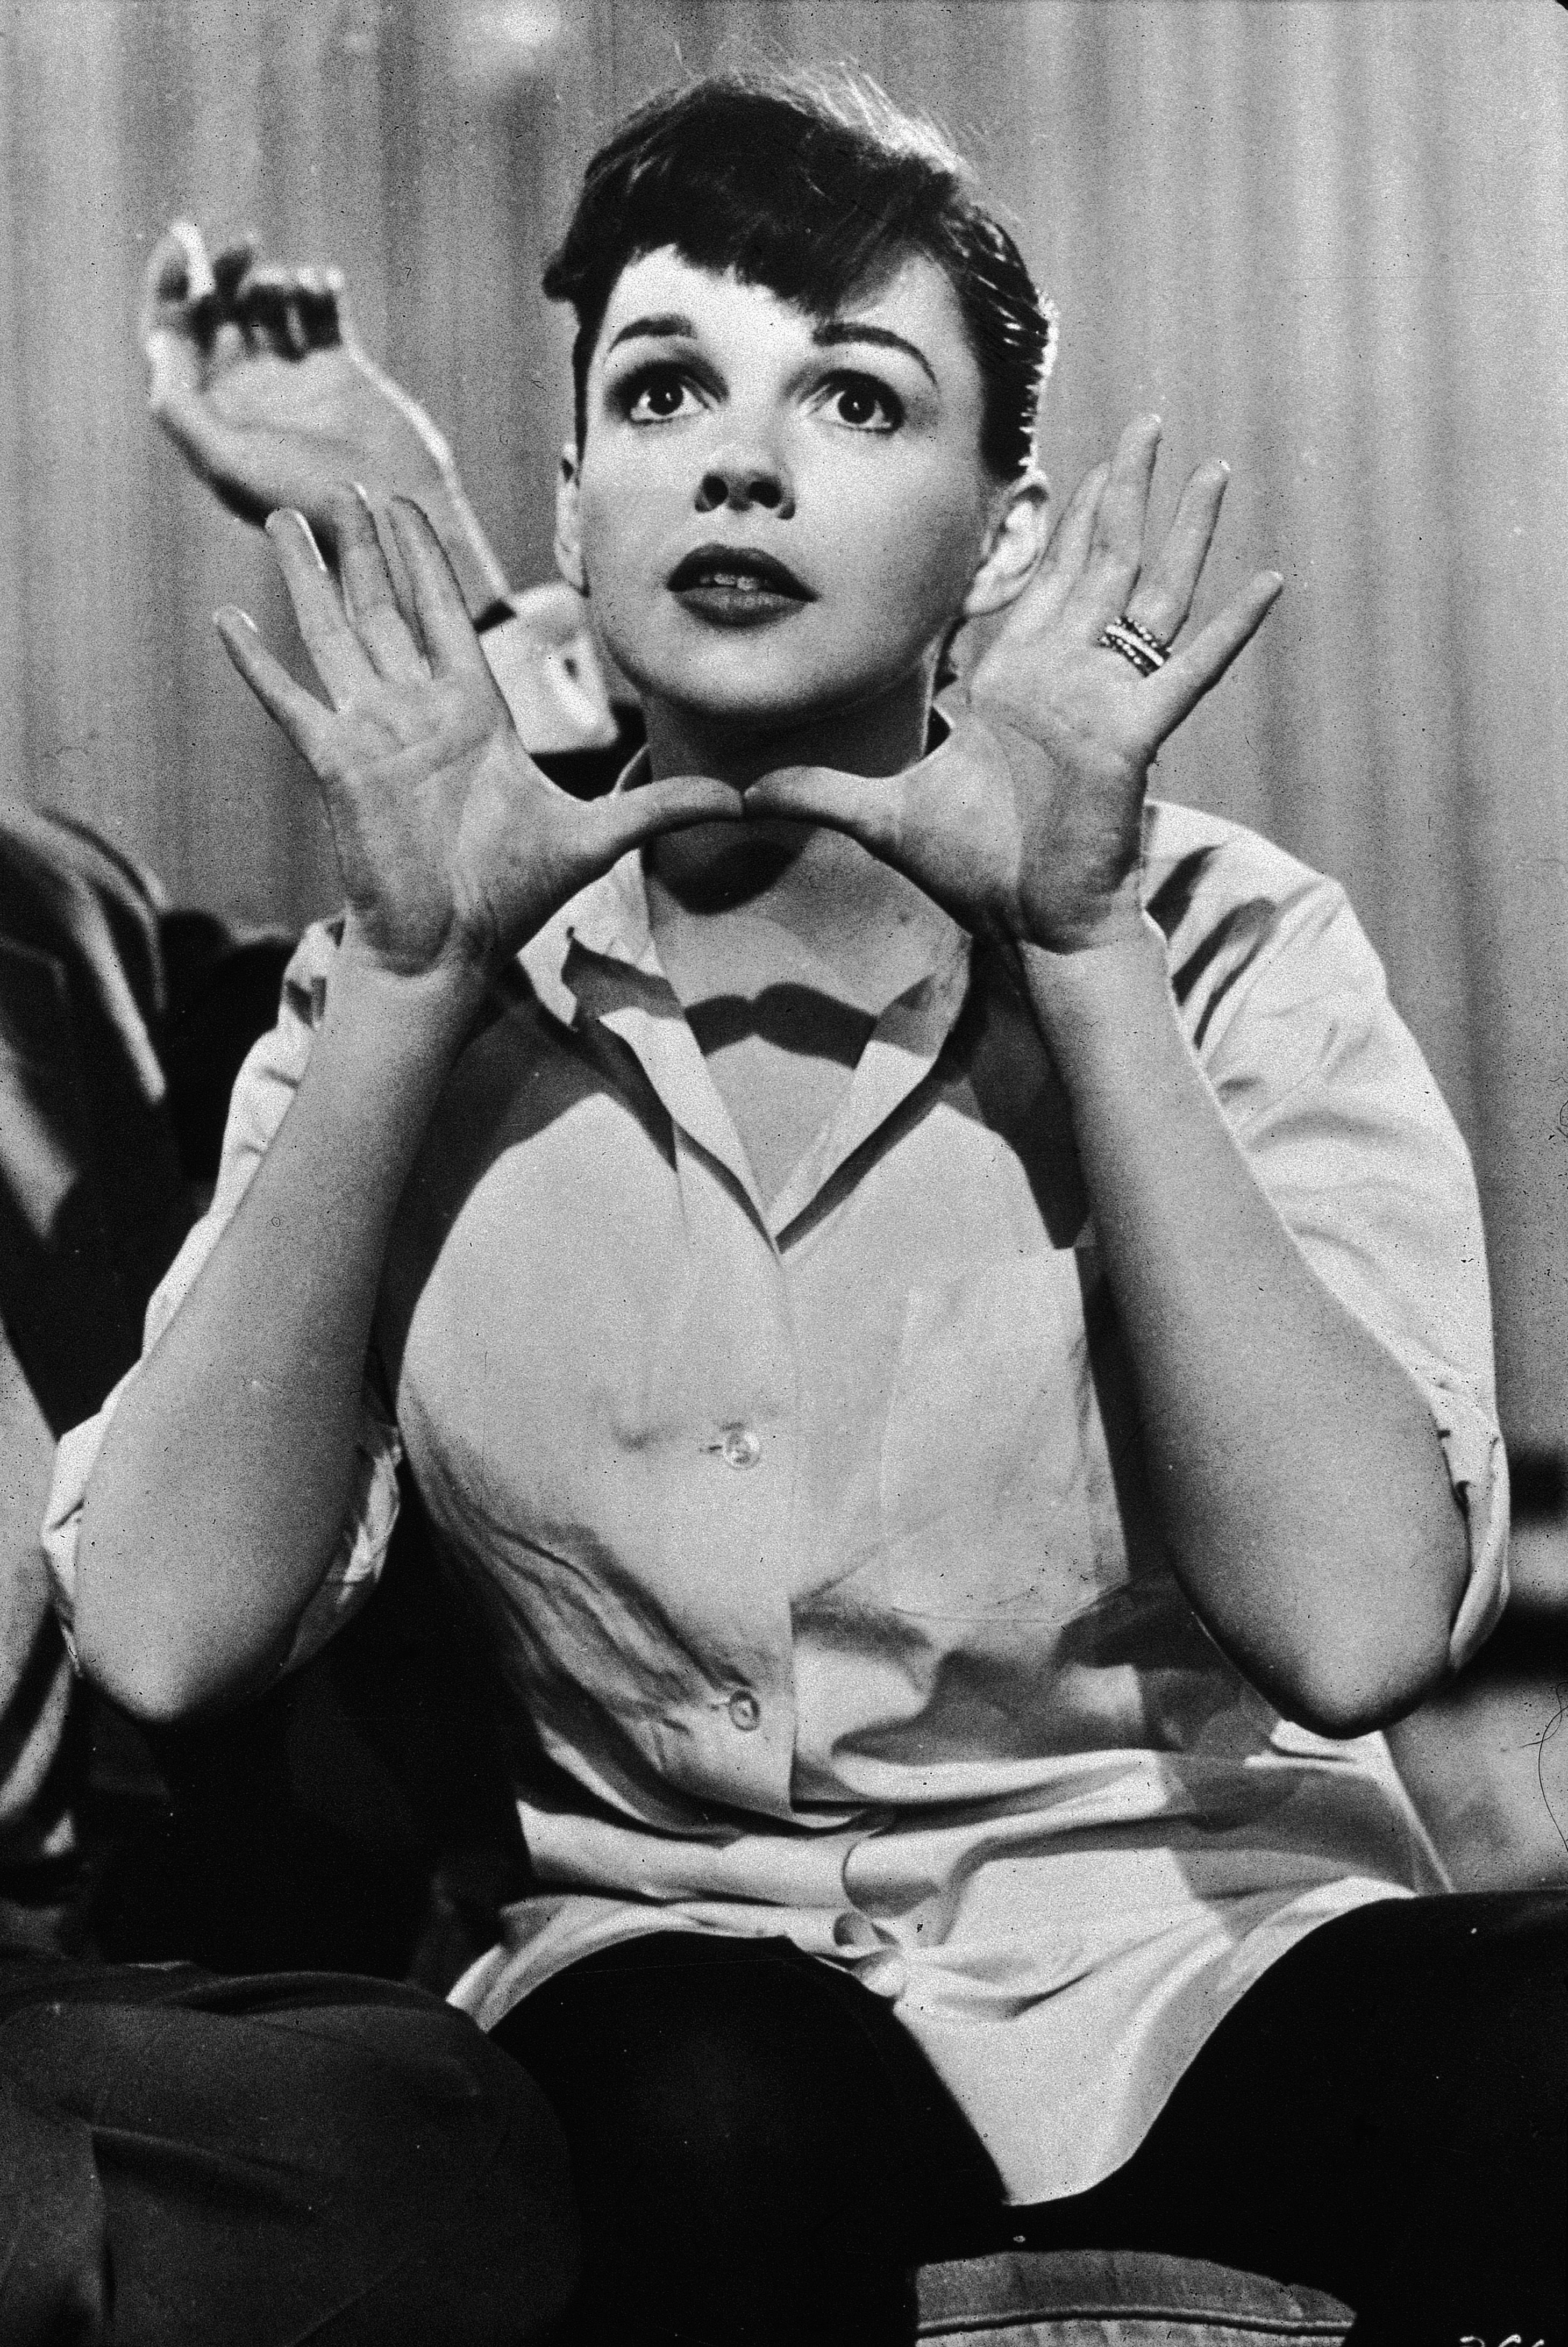 Judy Garland holds her hands up near her face, circa 1950's. | Source: Getty Images